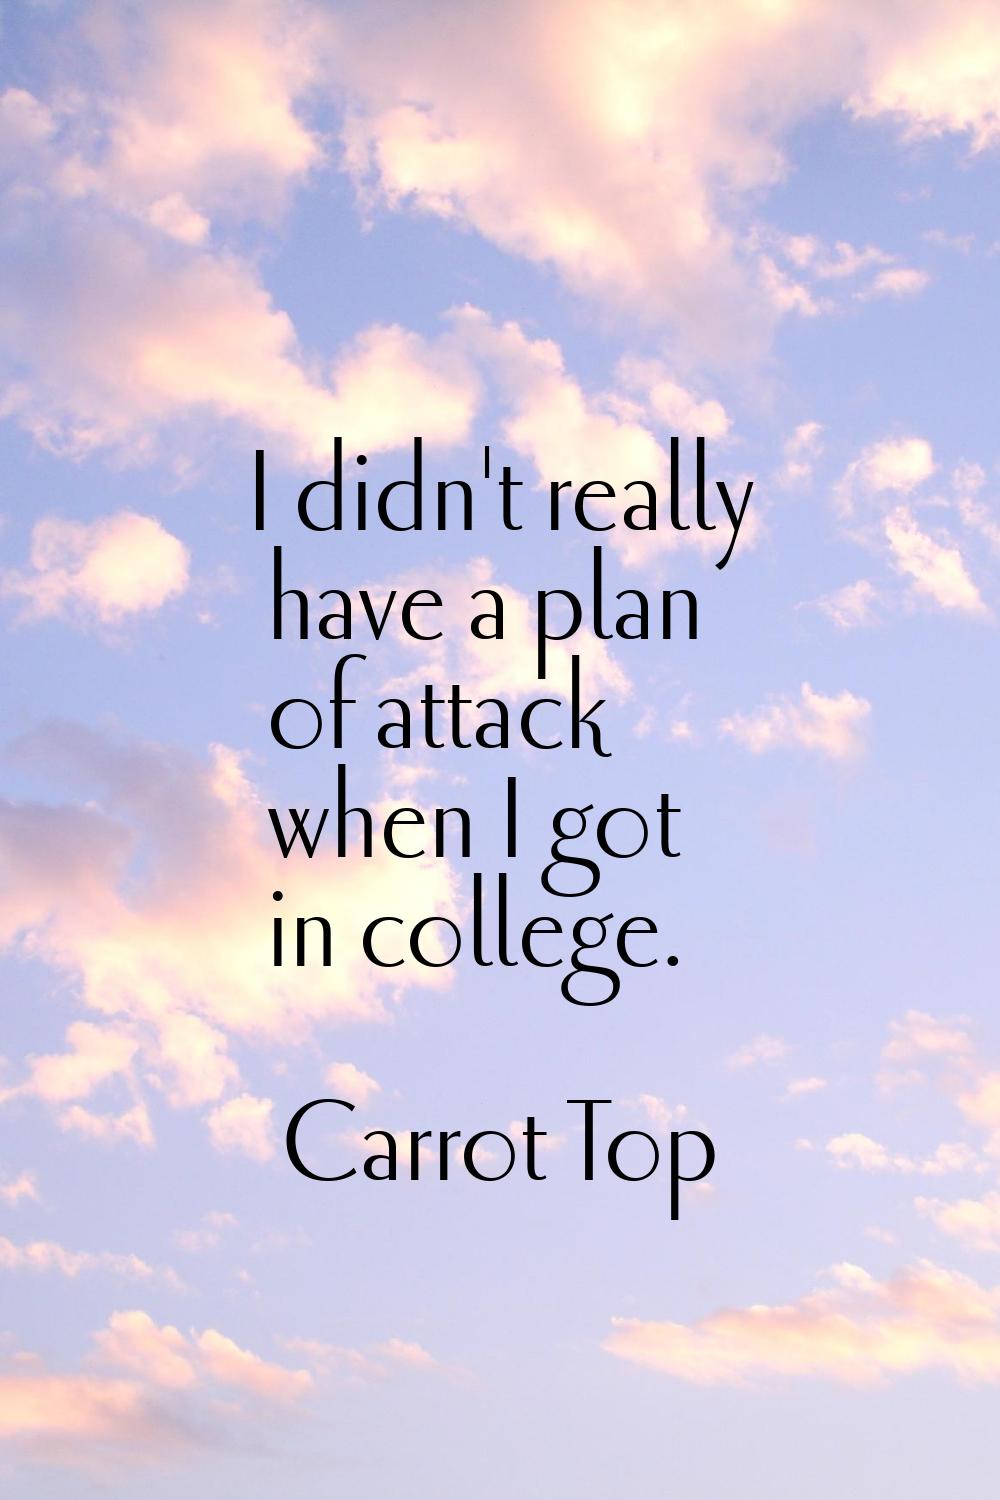 I didn't really have a plan of attack when I got in college.